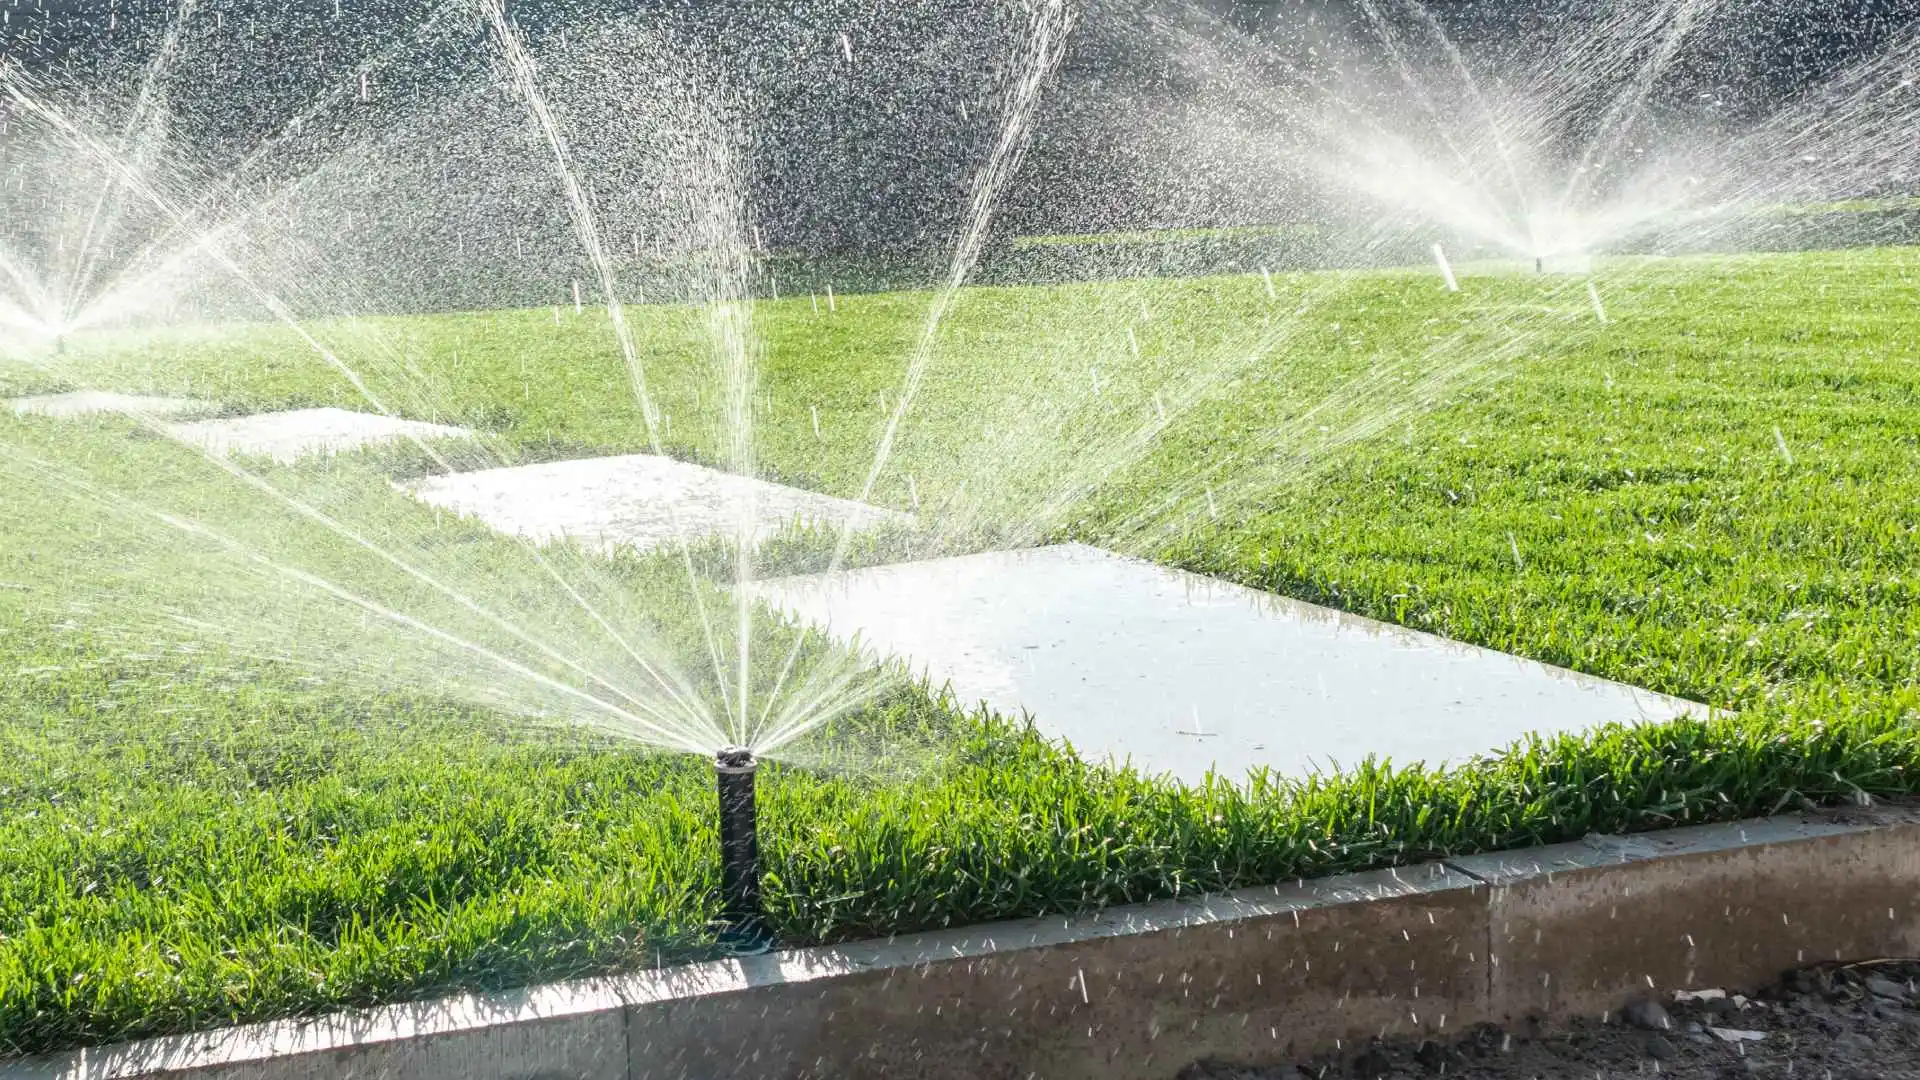 Irrigation systems sprinkling water over lawn in Little Rock, AR.